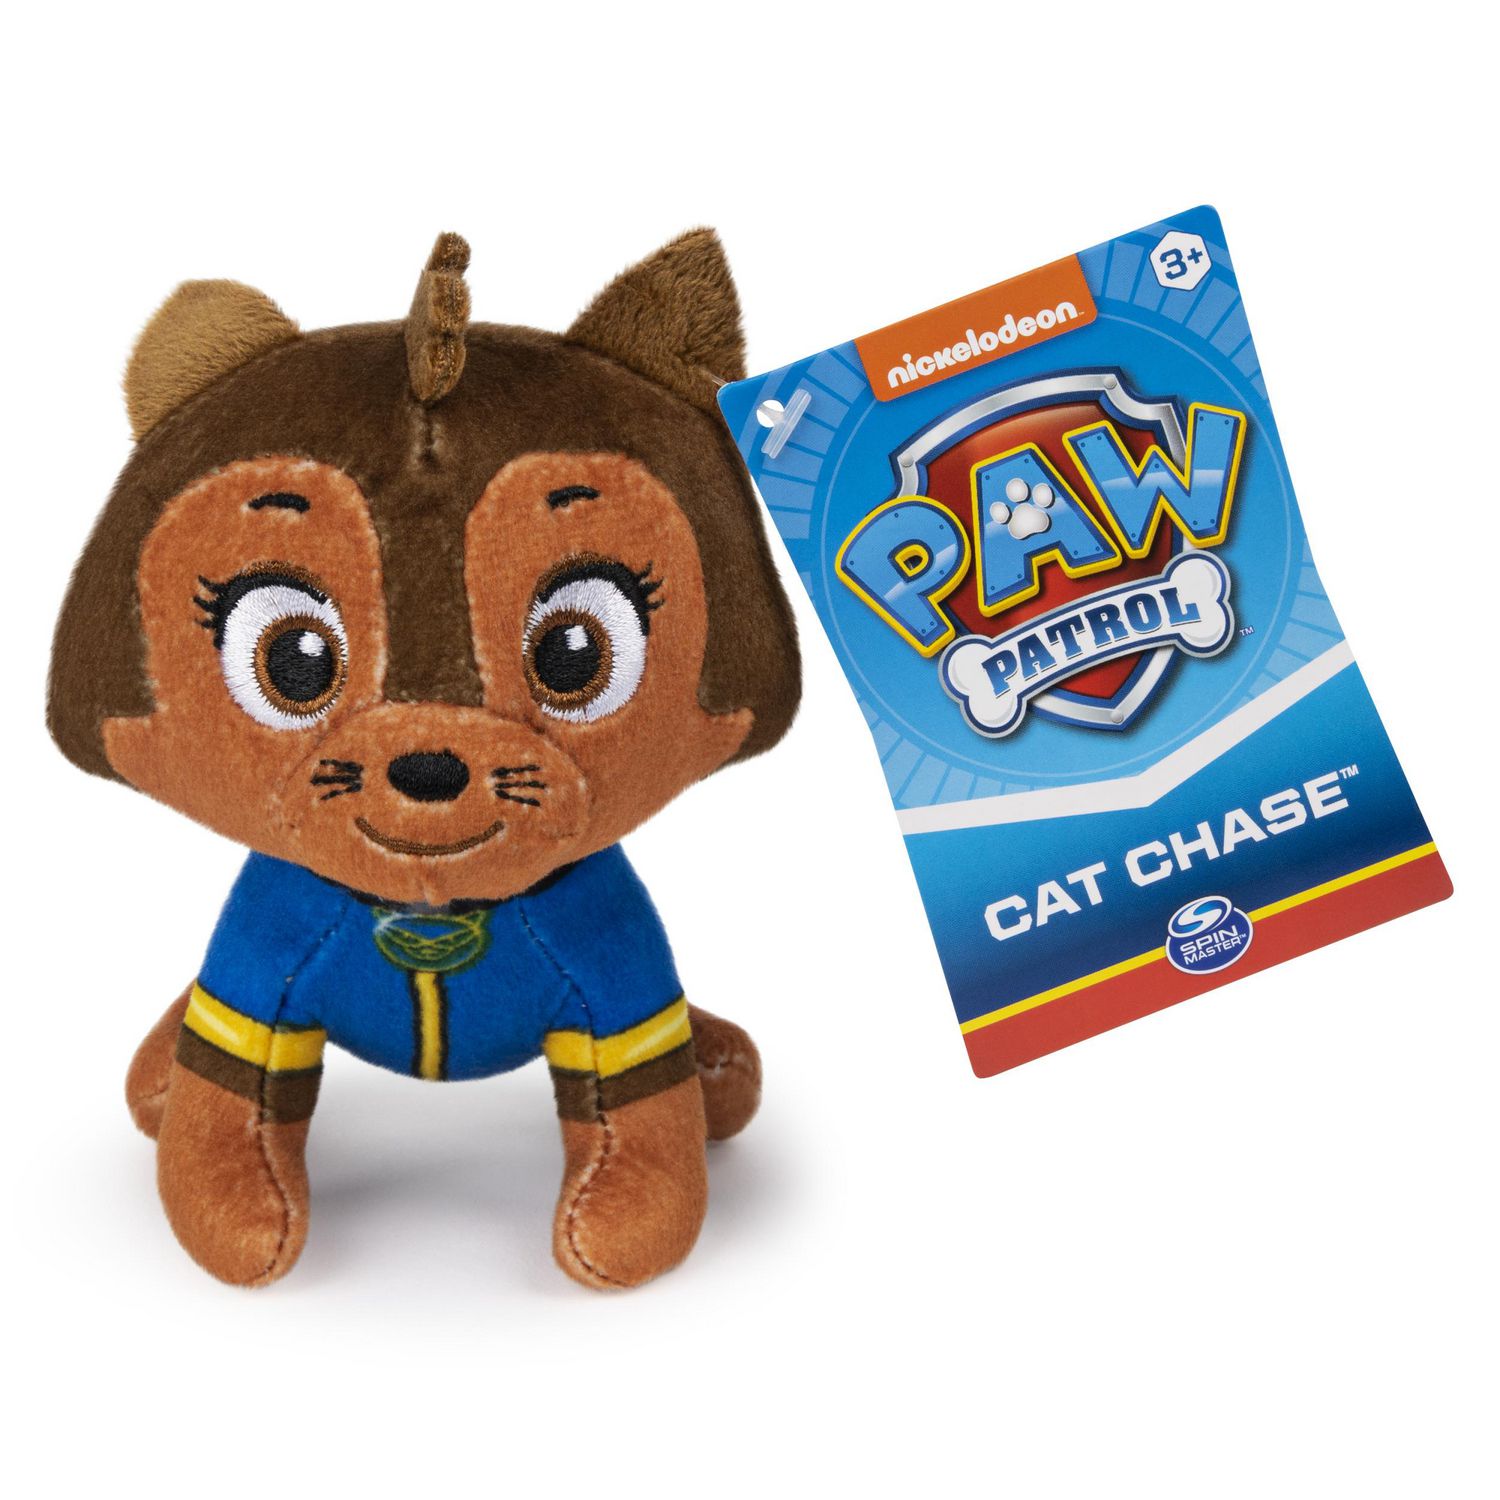 PAW 5” Cat Chase Mini Plush Pup, for Ages 3 and Up | Walmart Canada